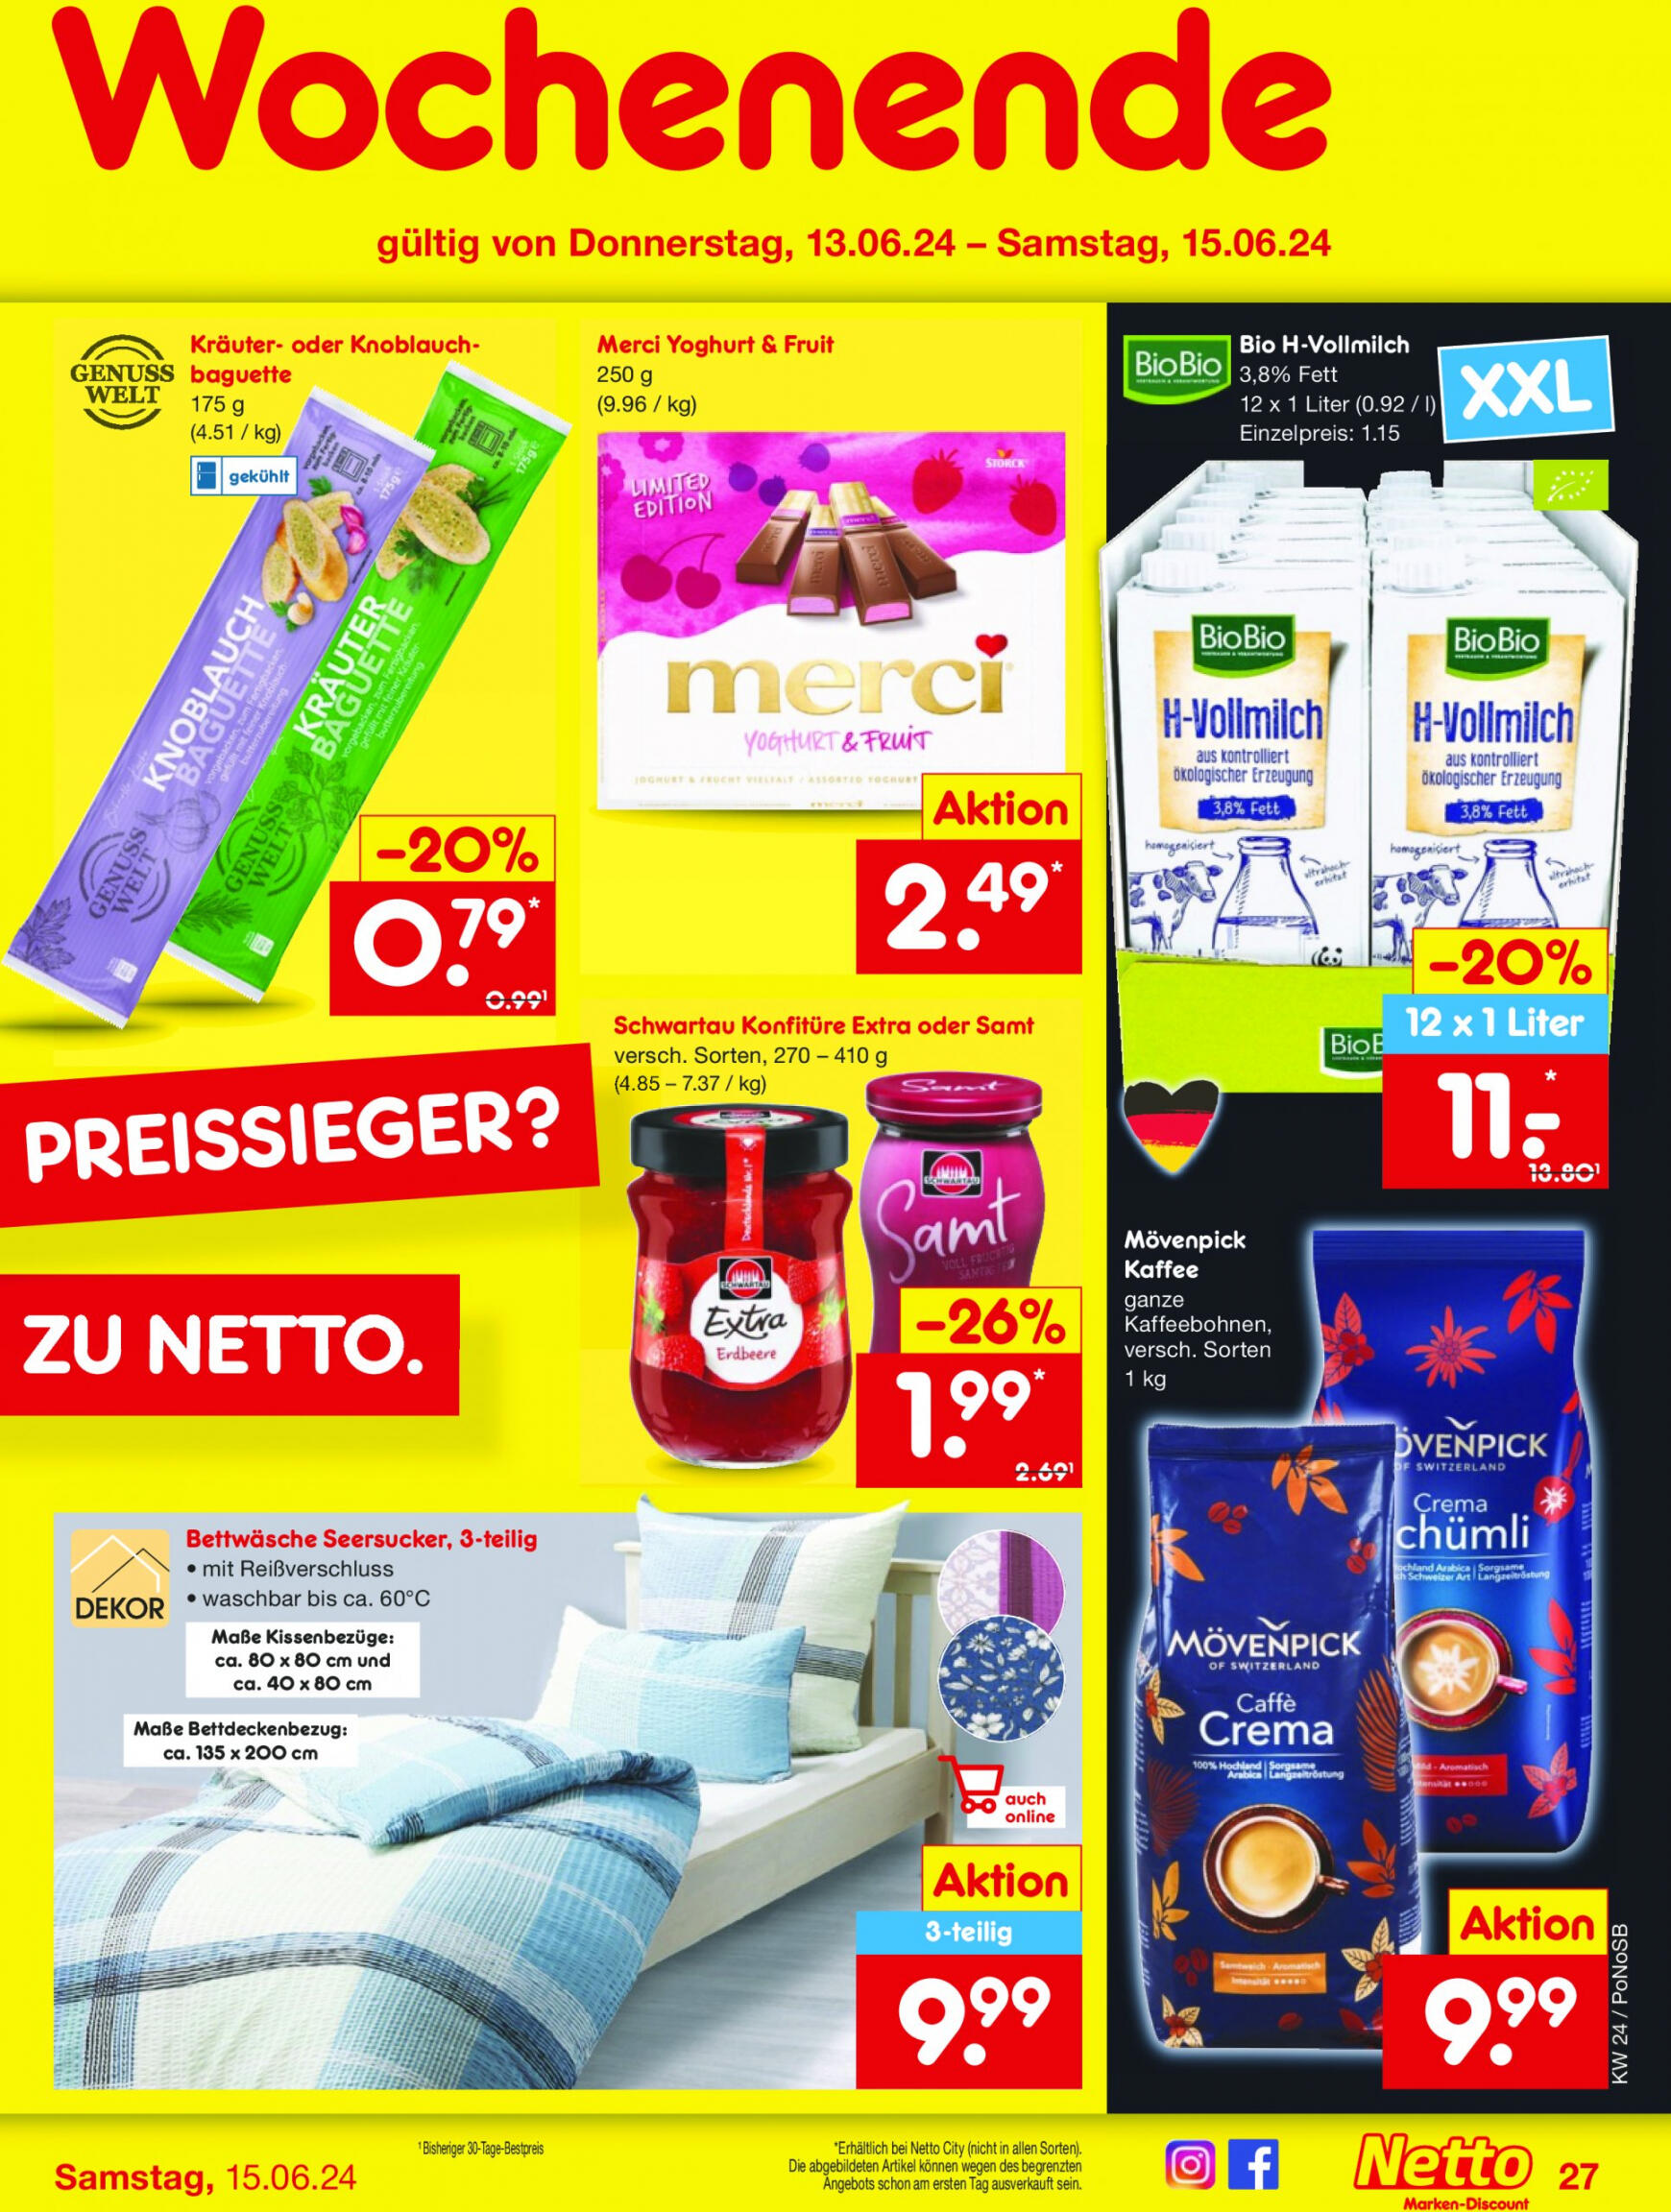 netto - Flyer Netto aktuell 10.06. - 15.06. - page: 43